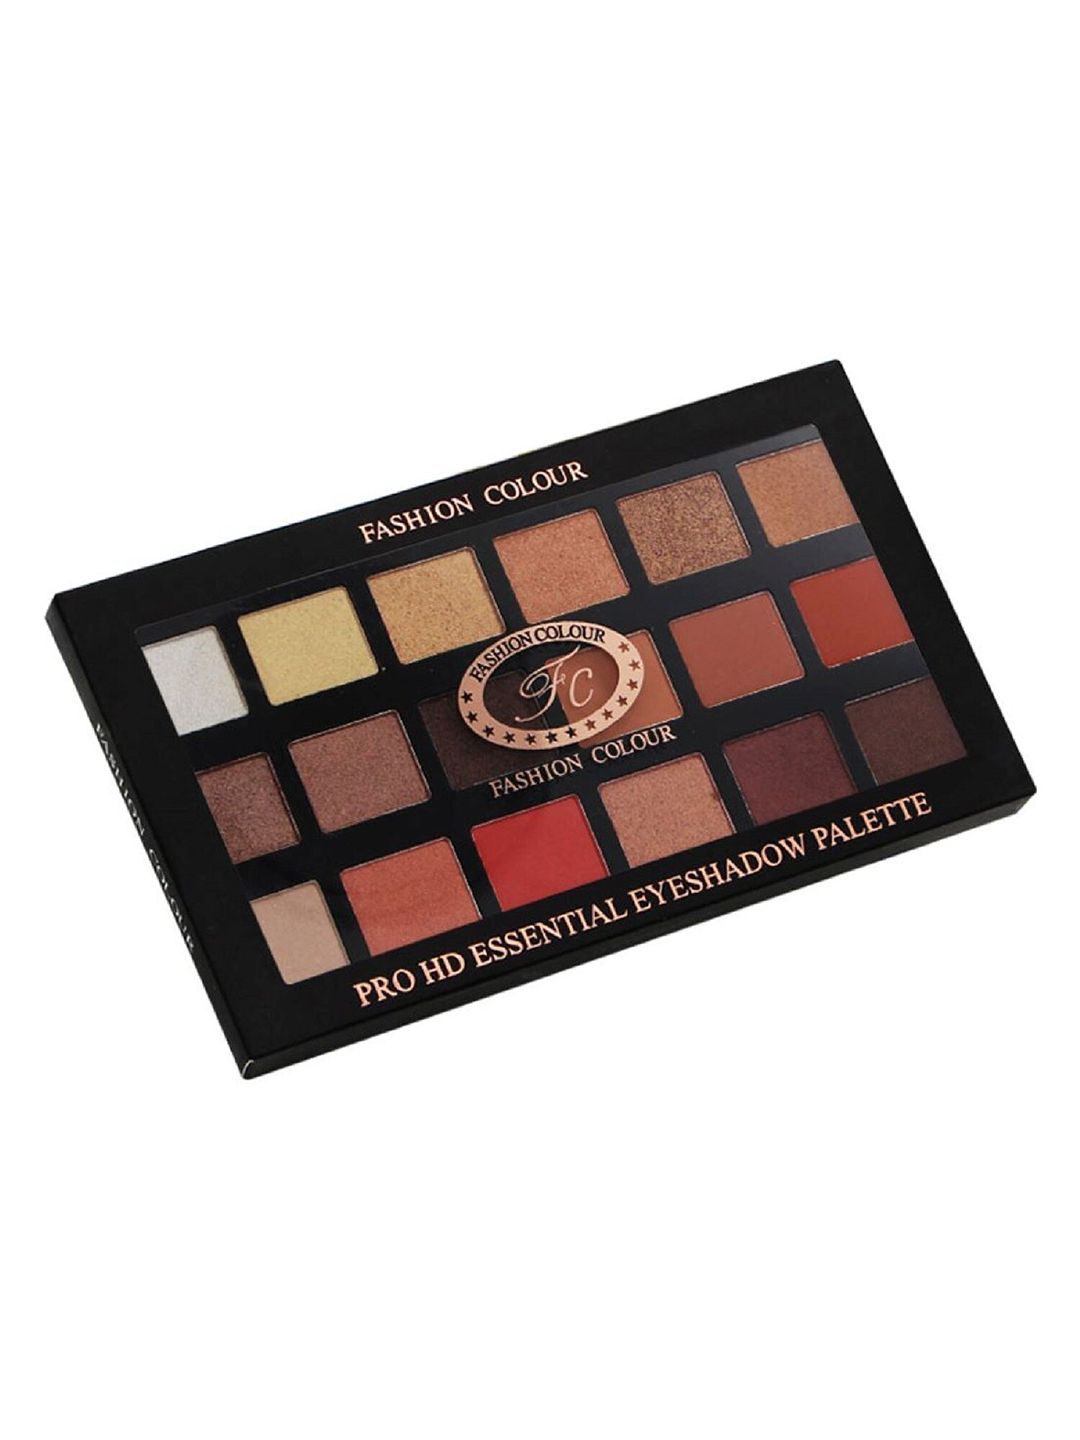 Fashion Colour Pro HD Essential 18 Shades Eyeshadow Palette  14 g - Shade 03 Price in India